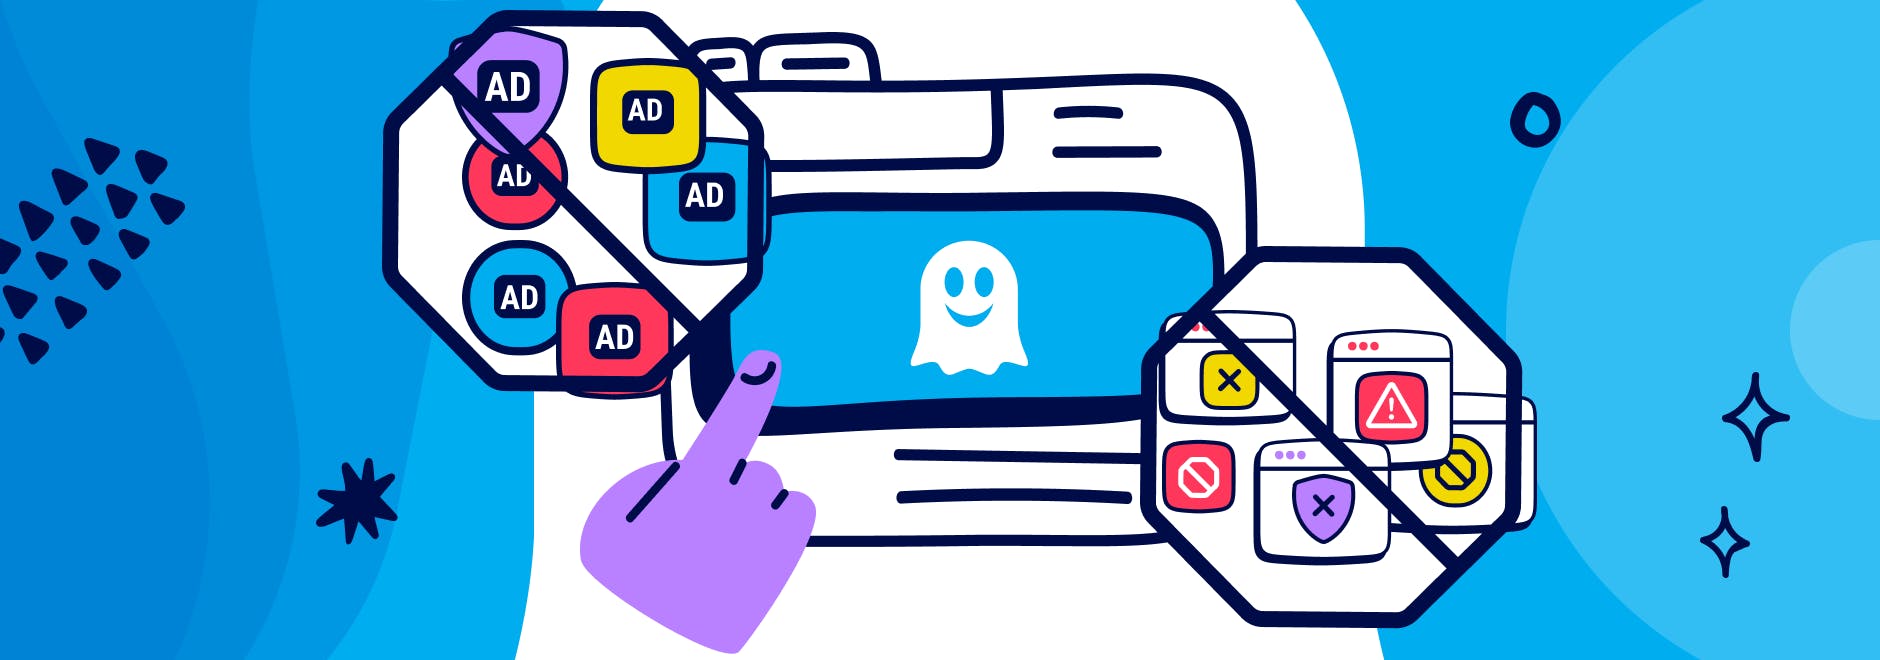 How to Block Ads & Pop-ups for Free with Ghostery